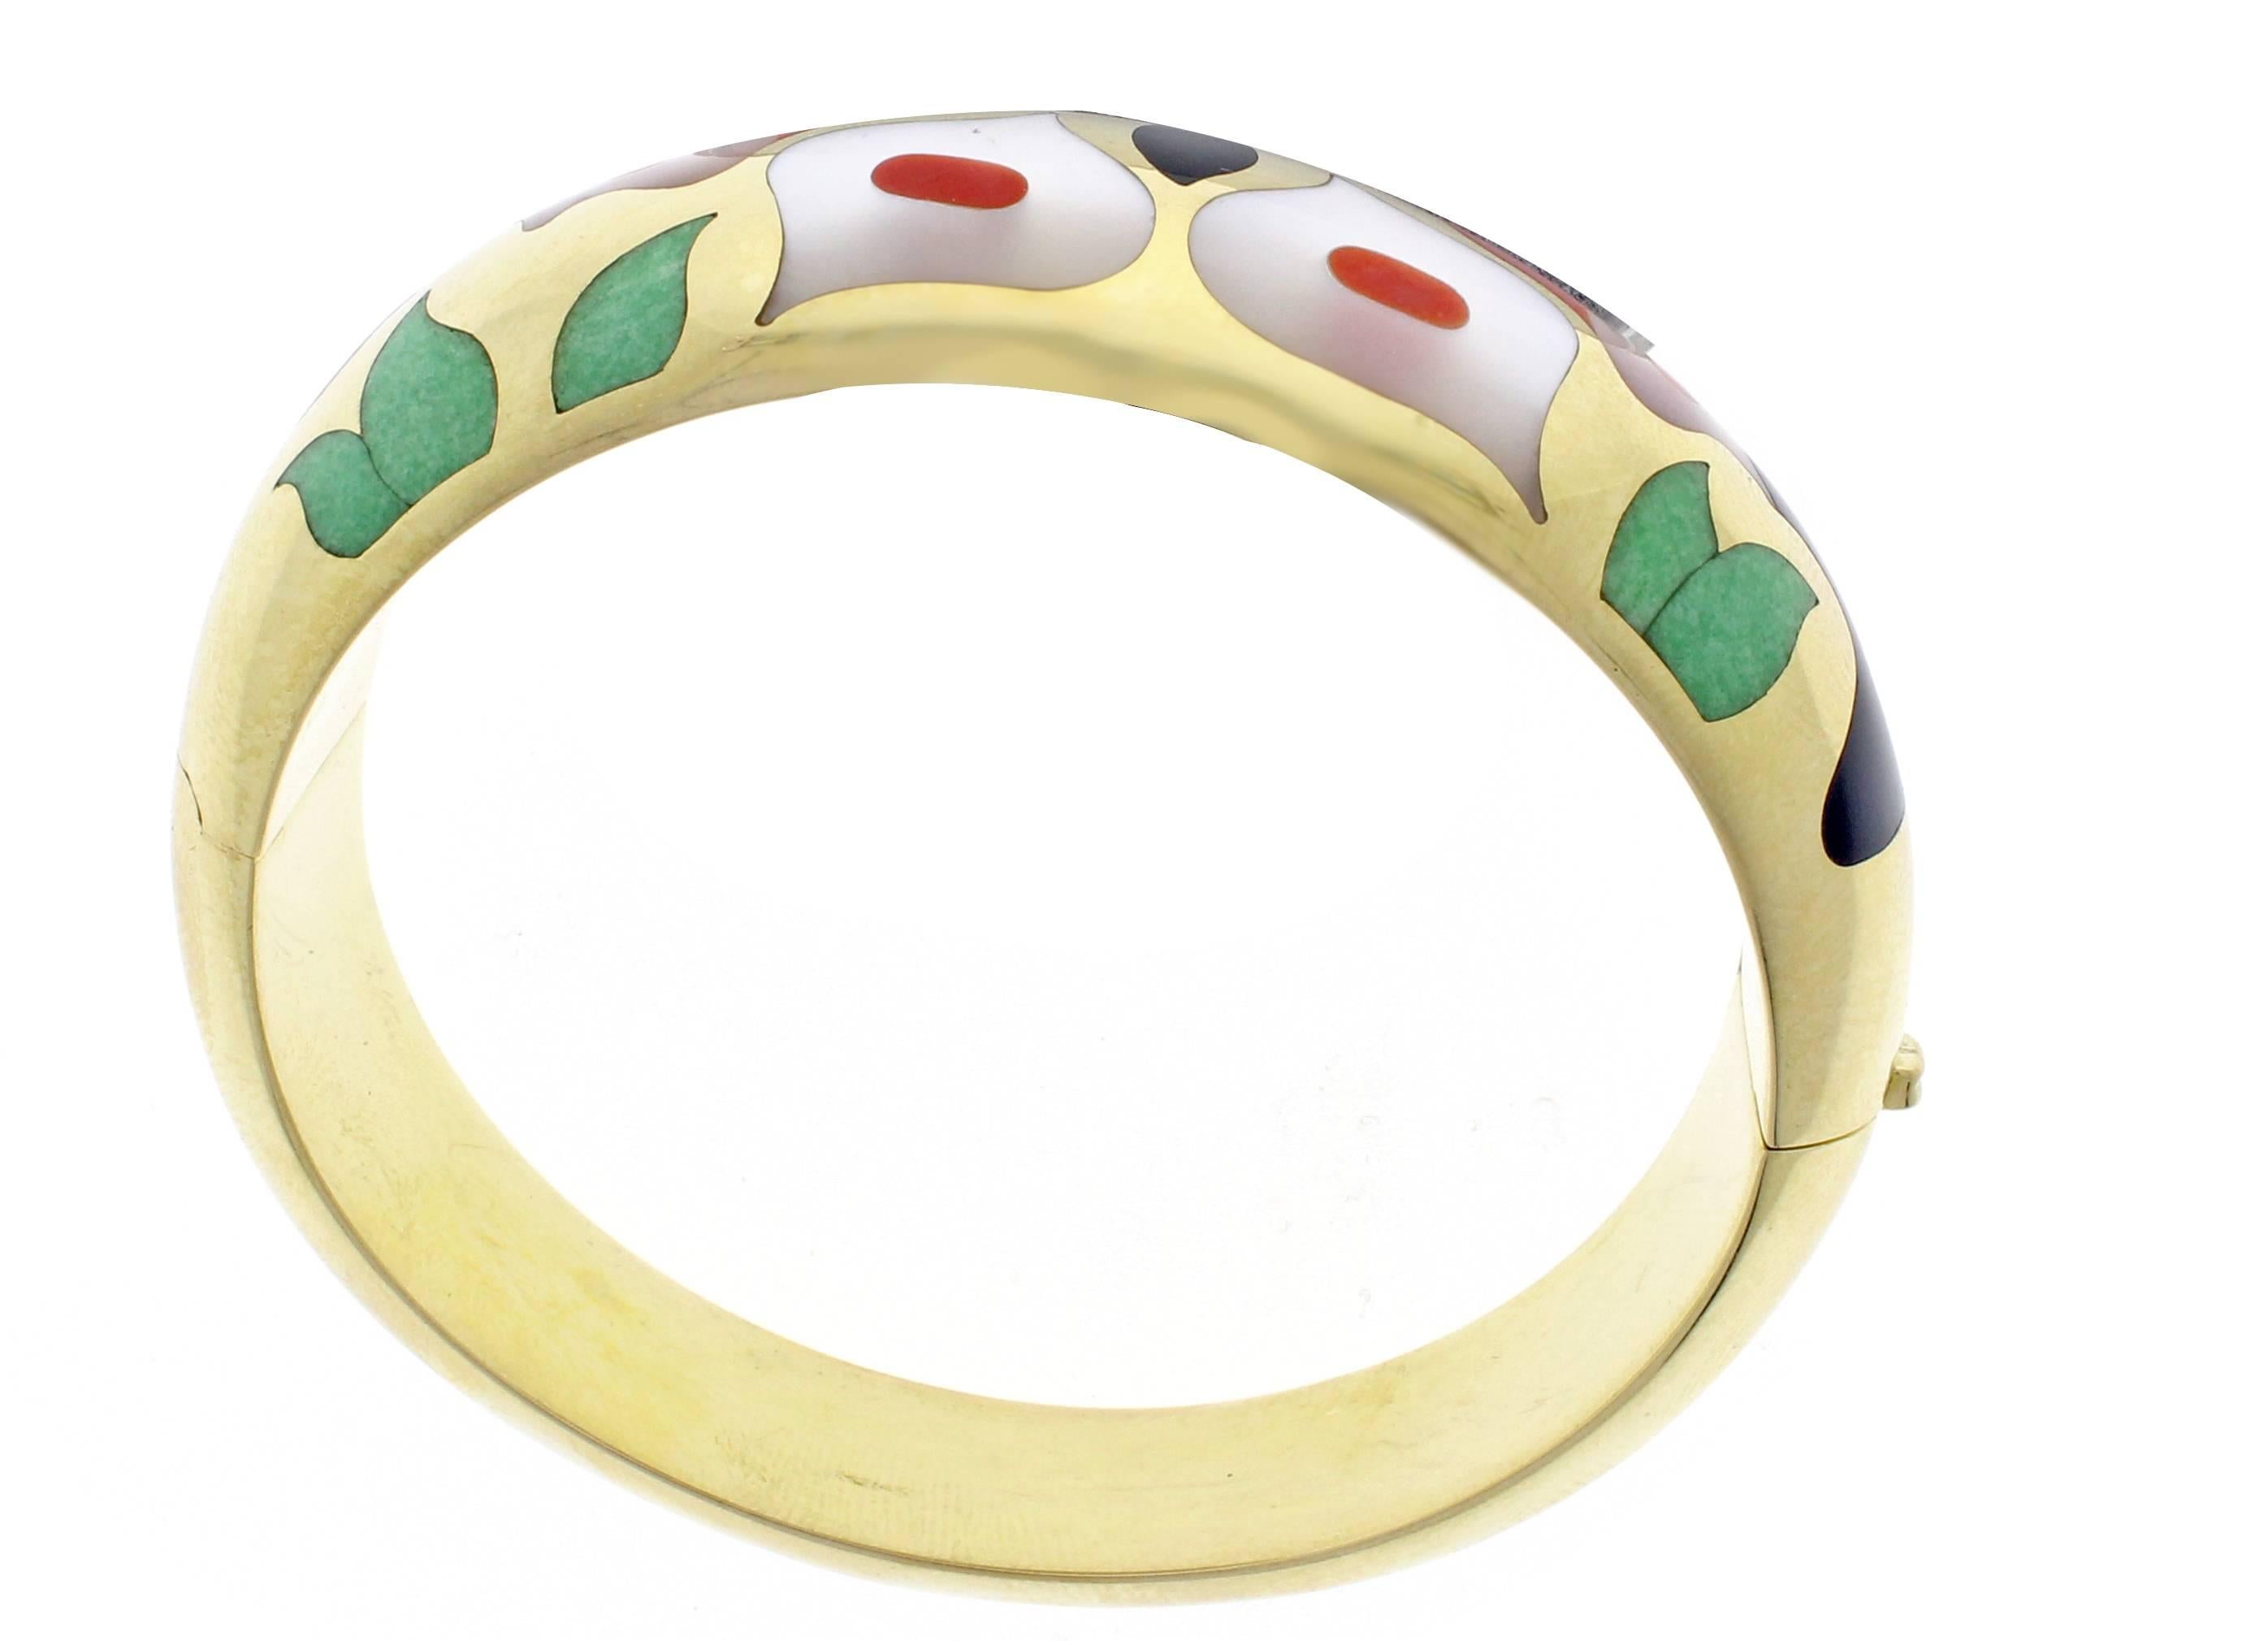 This Asch Grossbardt bracelet is circa 1990 and is 14 Karat yellow gold. The bangle features a beautiful design made out of hardstone. The bracelet measures just under one inch in width at the widest part and tapers to just over 1/2 an inch at the